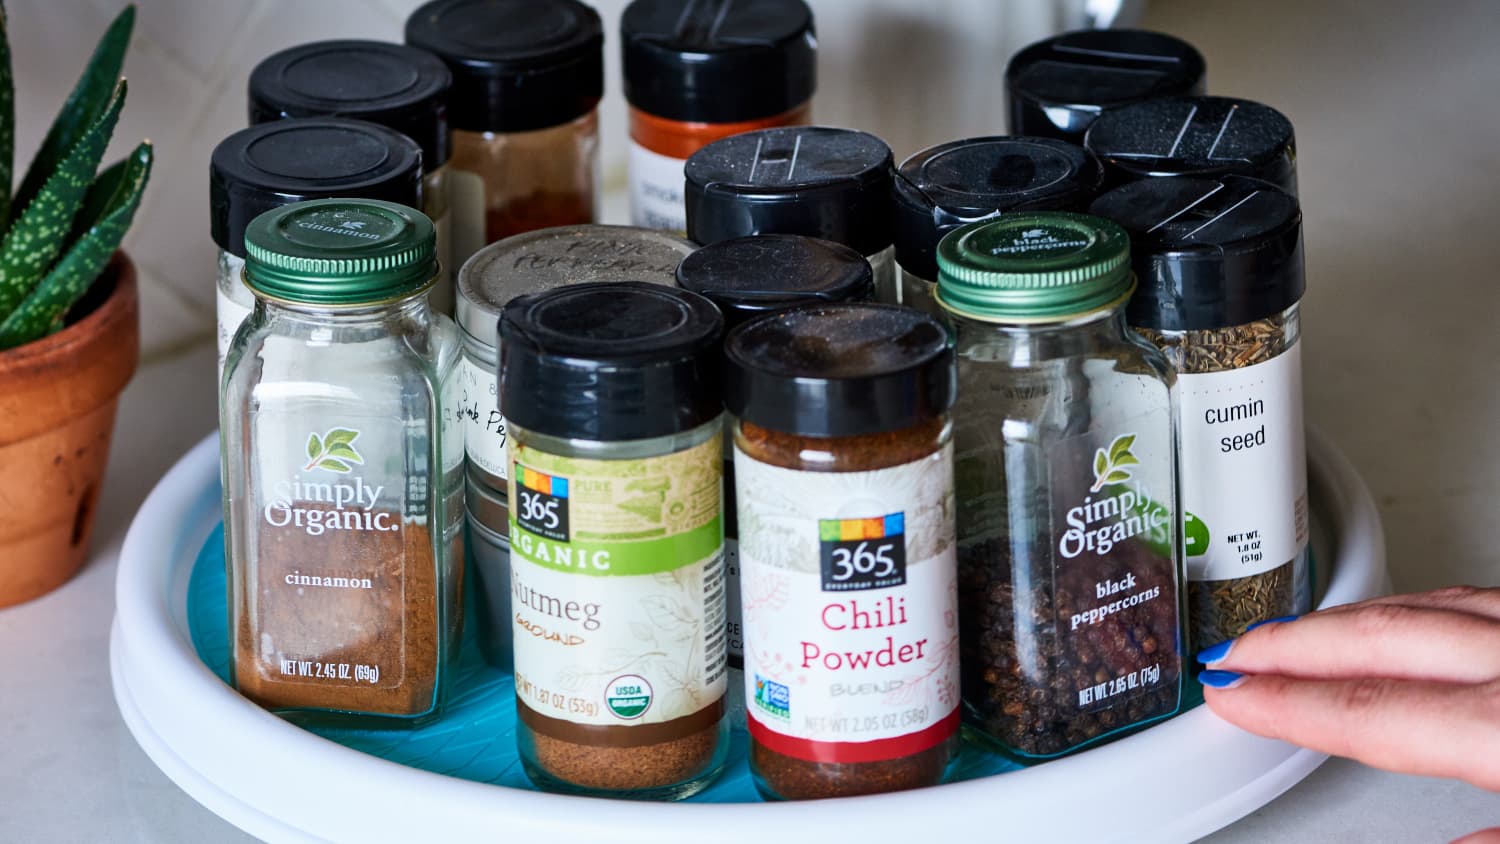 What is the best way to label spice jars - Suan